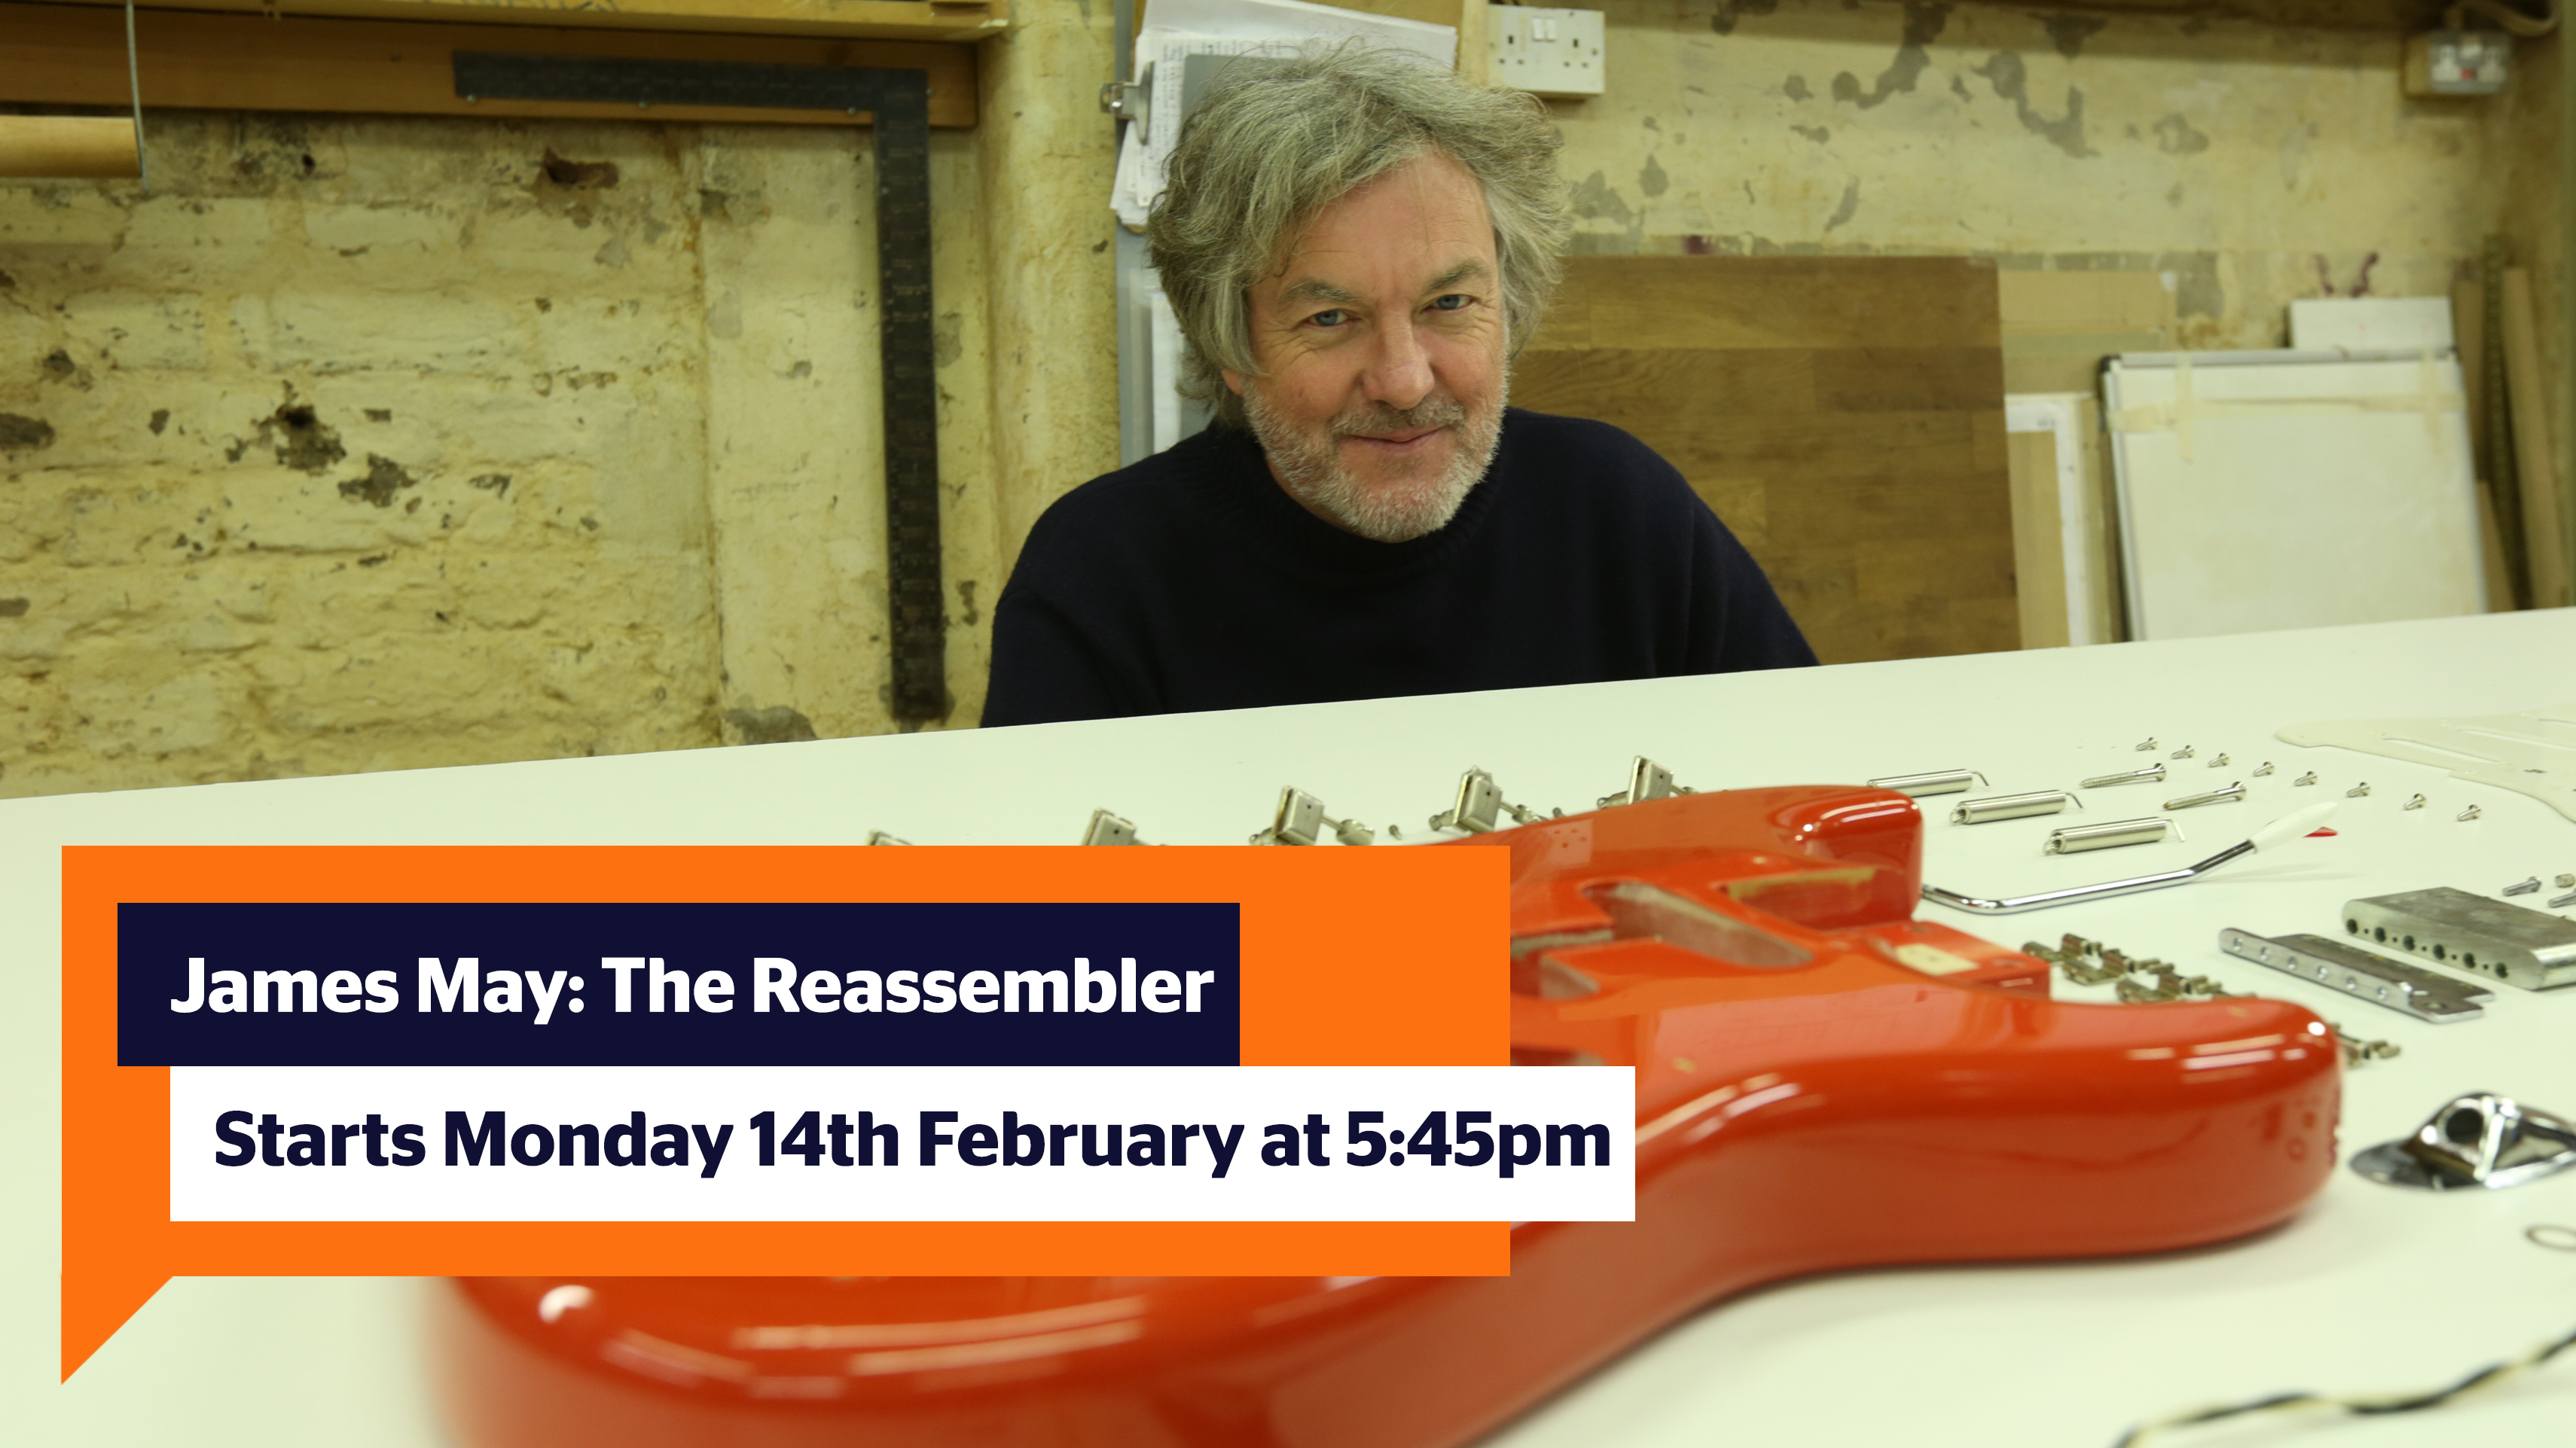 James May: The Reassembler Starts Monday 14th February at 5:45pm